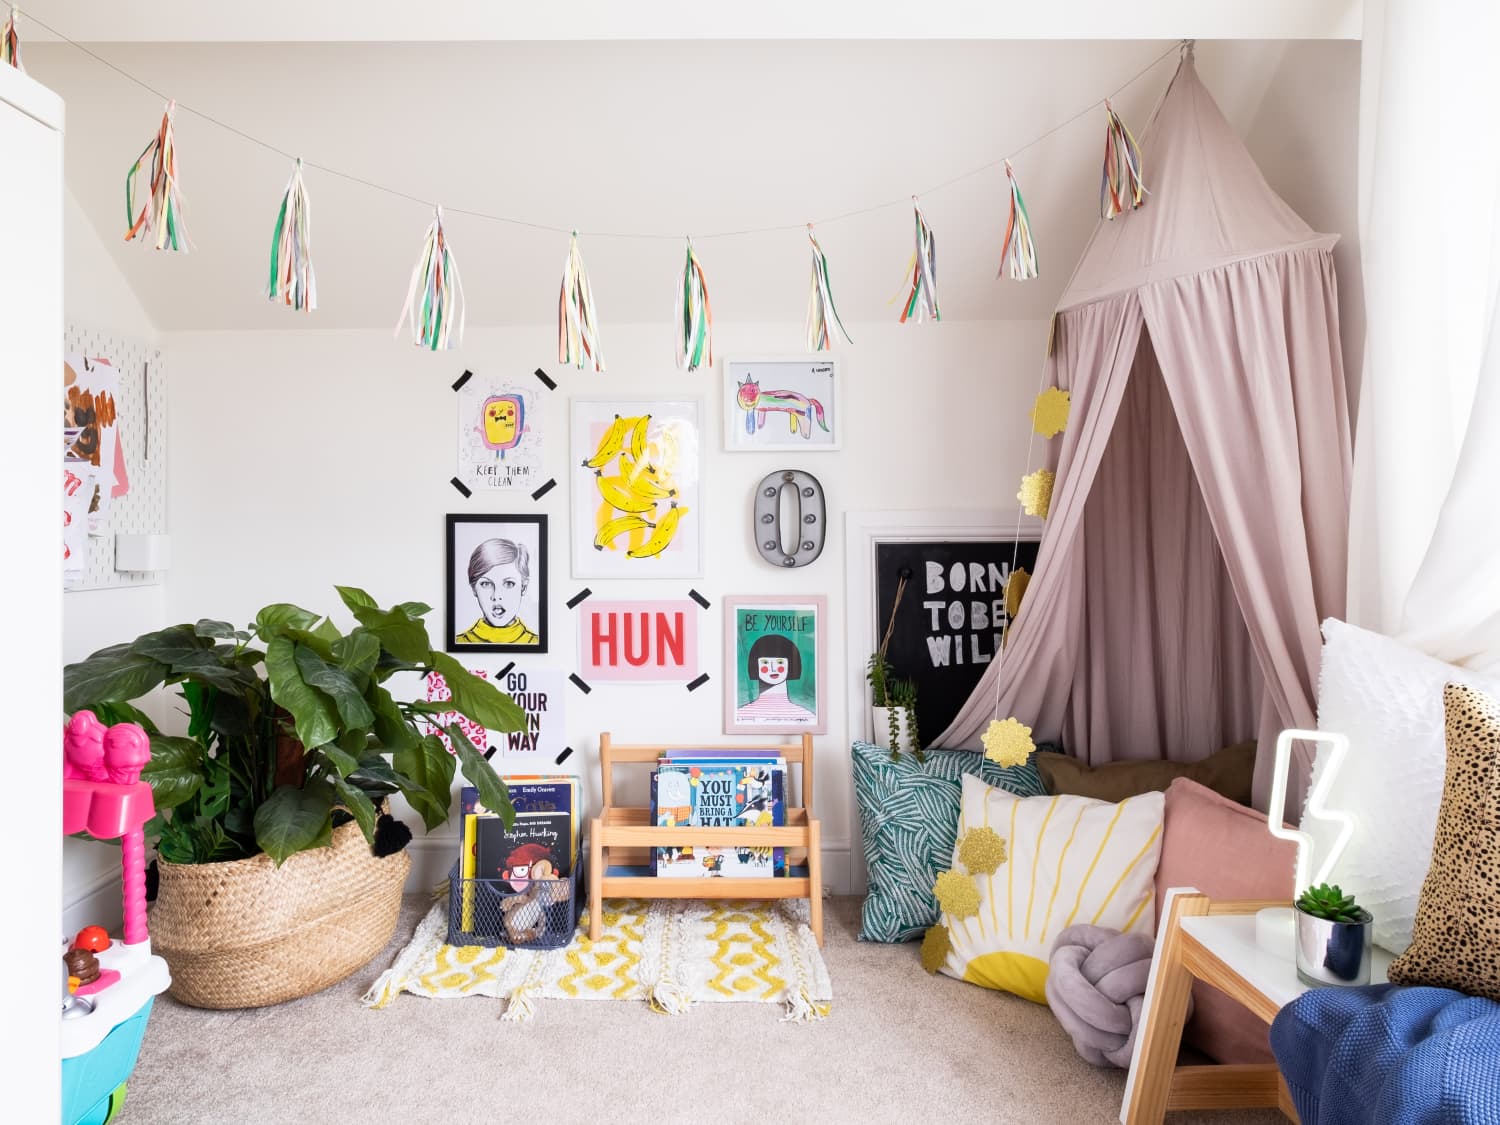 How Parents Organize and Store Their Kids' Artwork